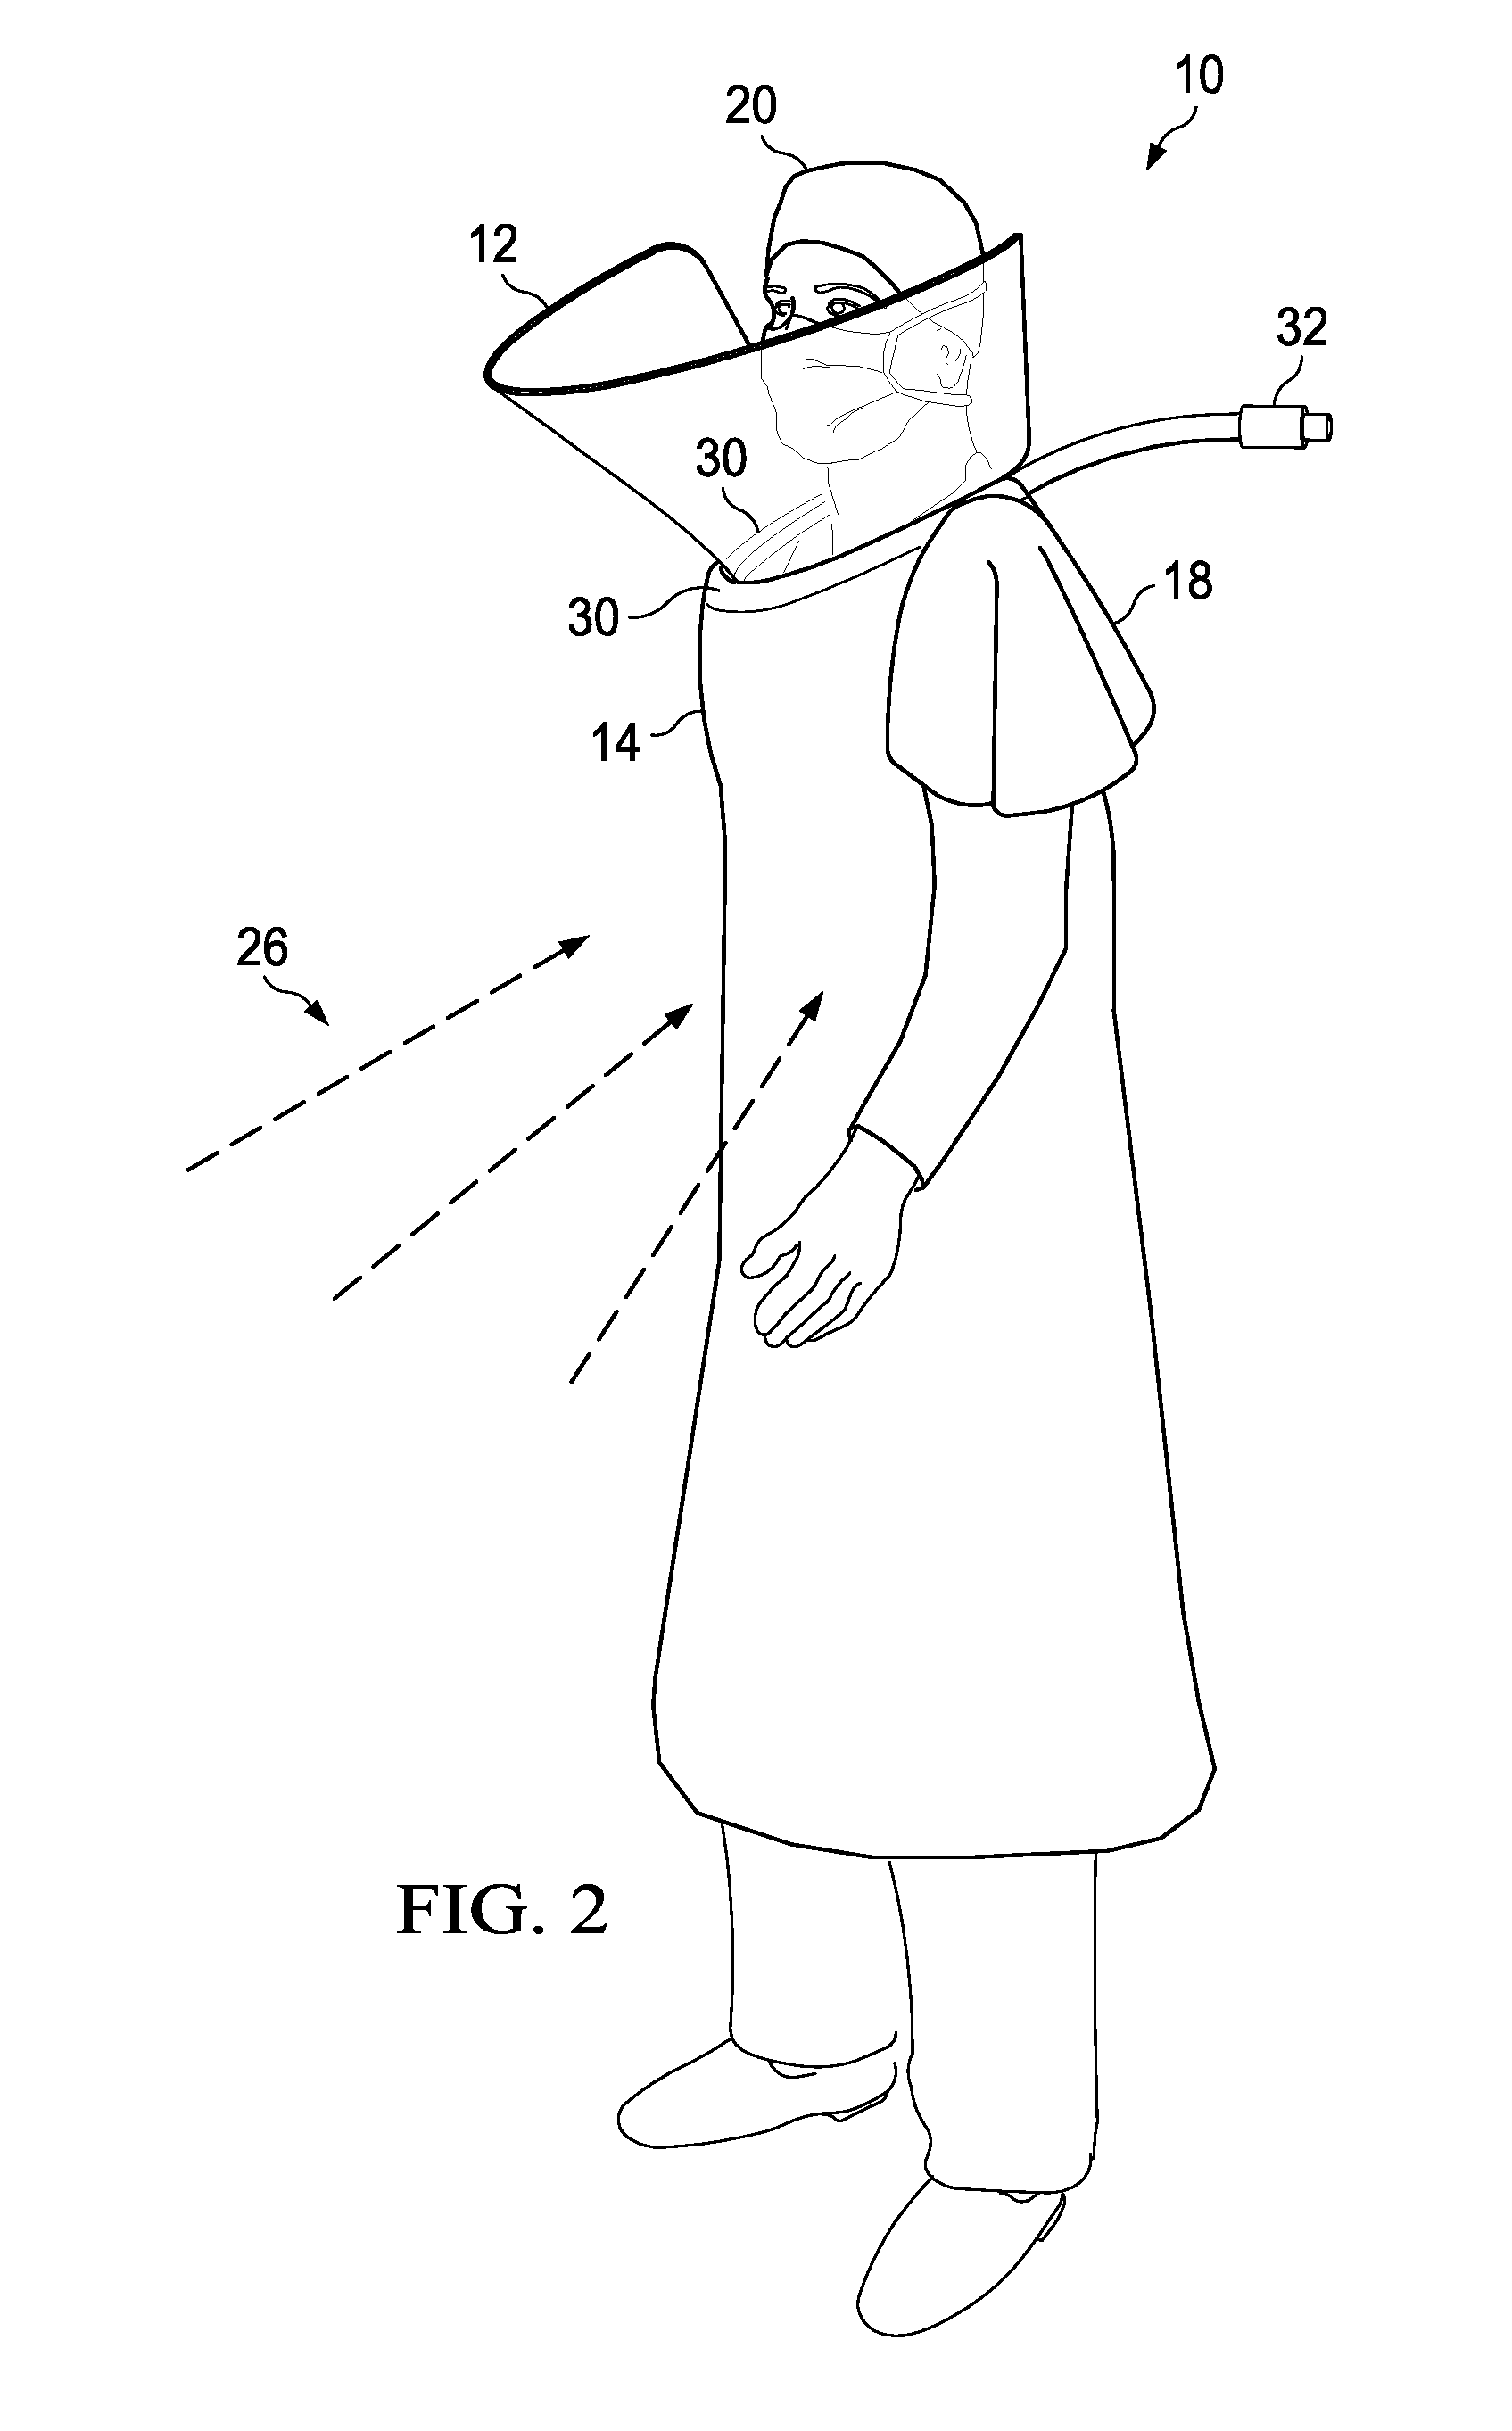 System and Method for Providing a Suspended Personal Radiation Protection System